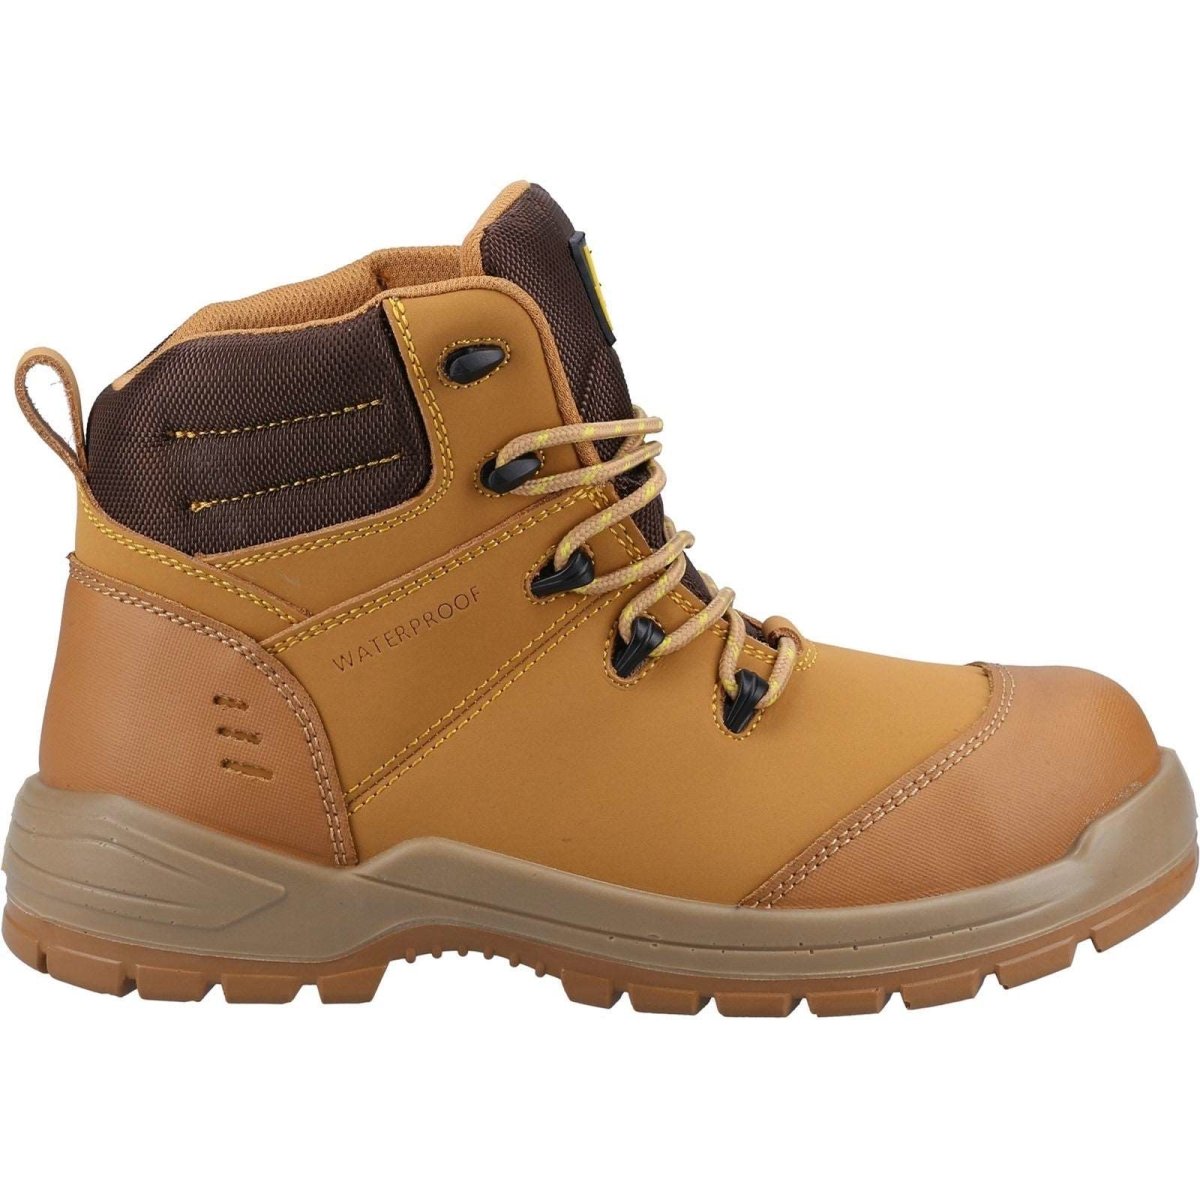 Amblers AS308C Waterproof Composite Toe Cap Safety Hiker Boots - Shoe Store Direct